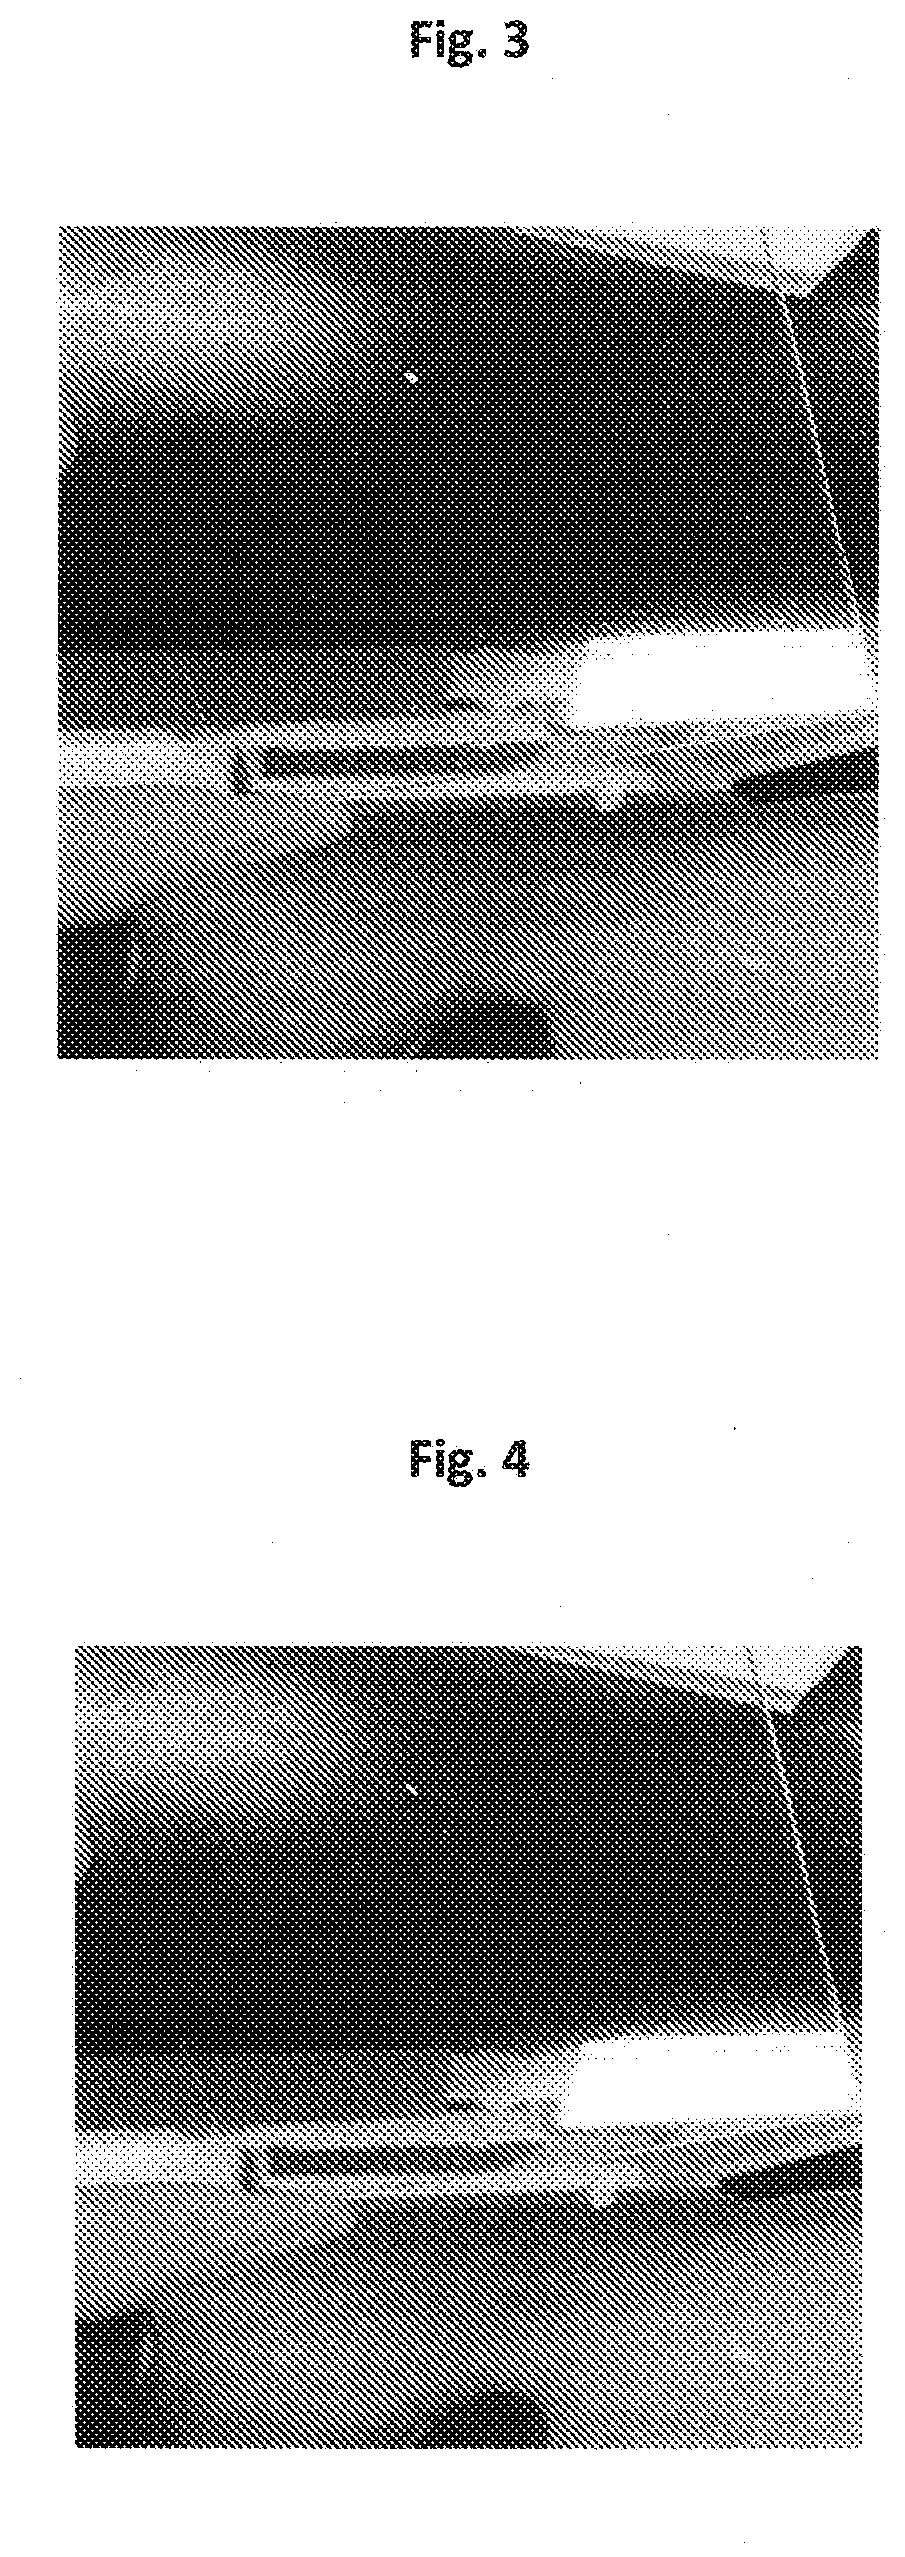 Headlight lens cleaning and restoring compositions and methods of use thereof